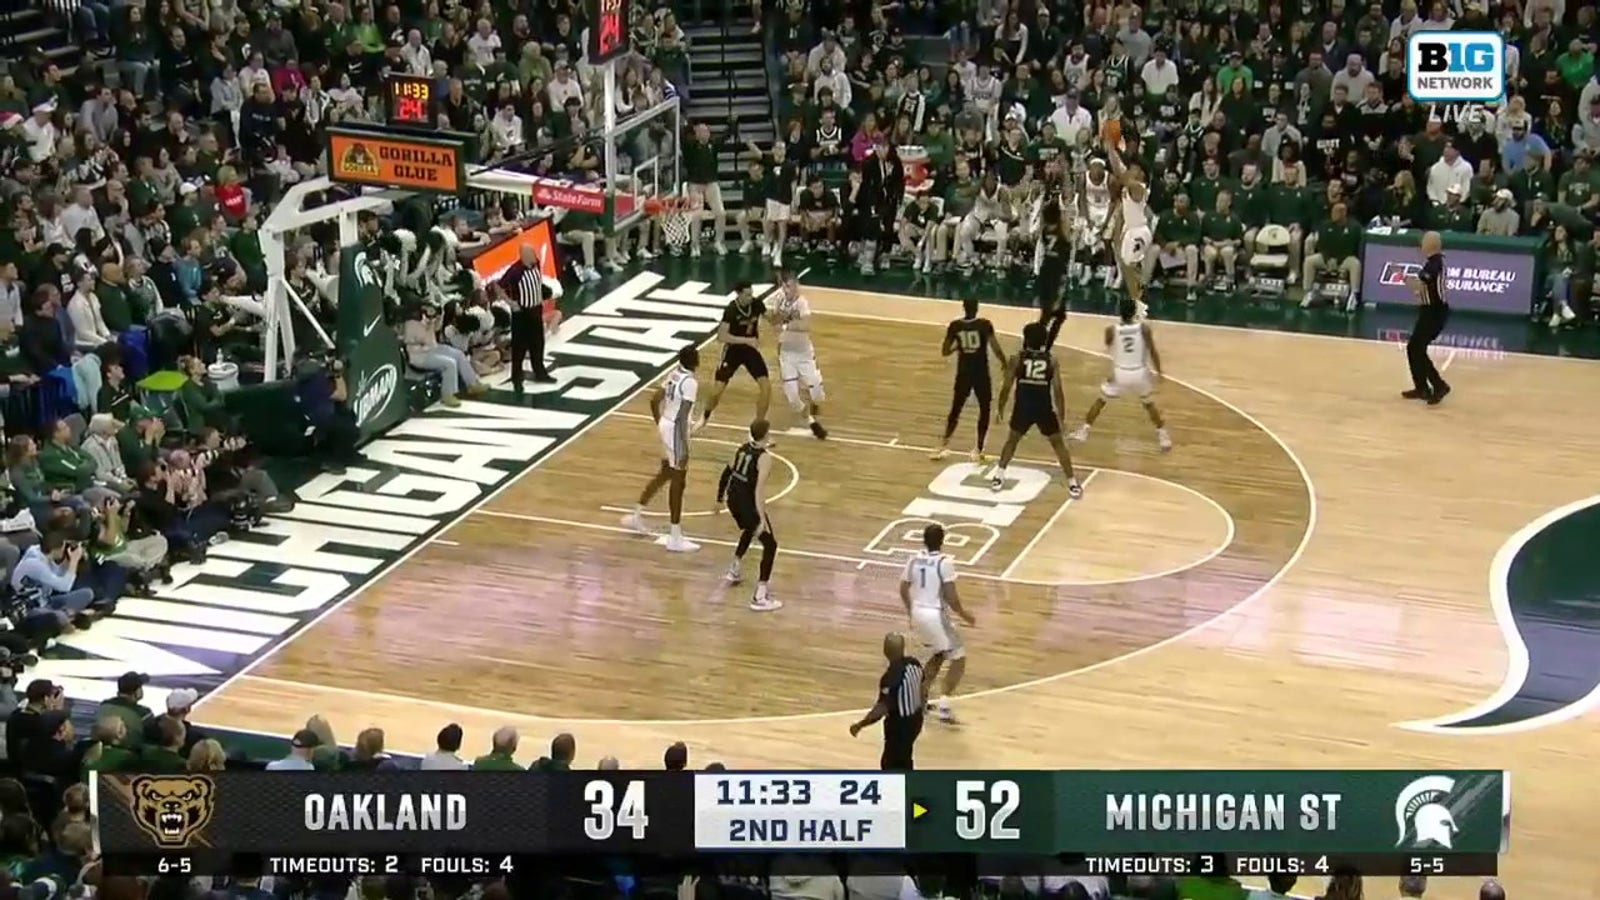 Jaden Akins buries a three in transition, extending Michigan State's lead vs. Oakland